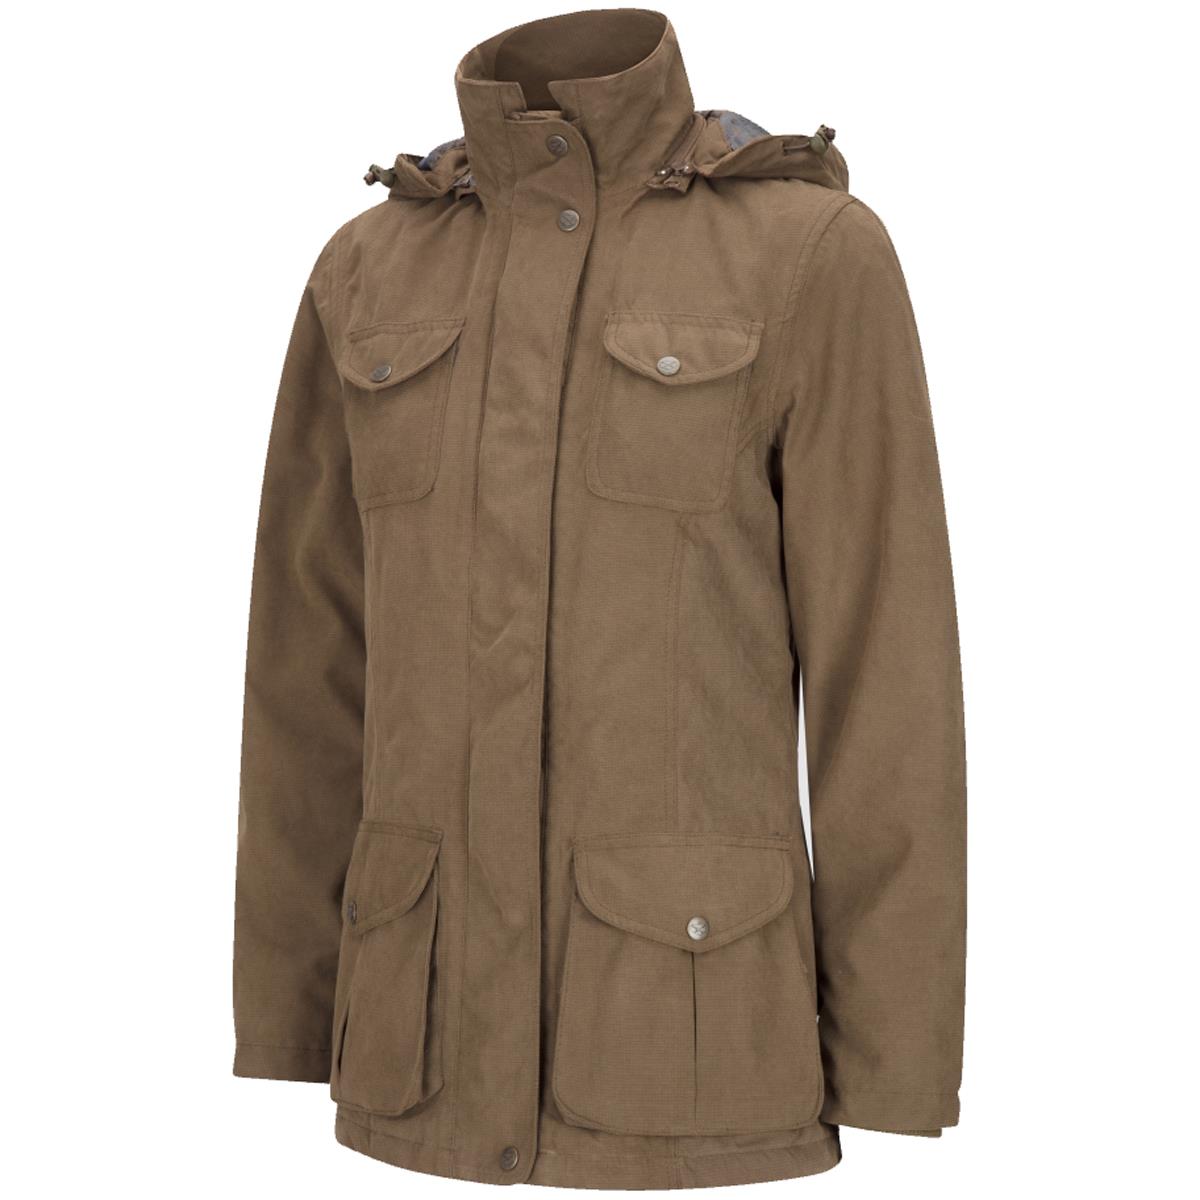 Is the Hoggs Struther Field coat in sage, brown or green?